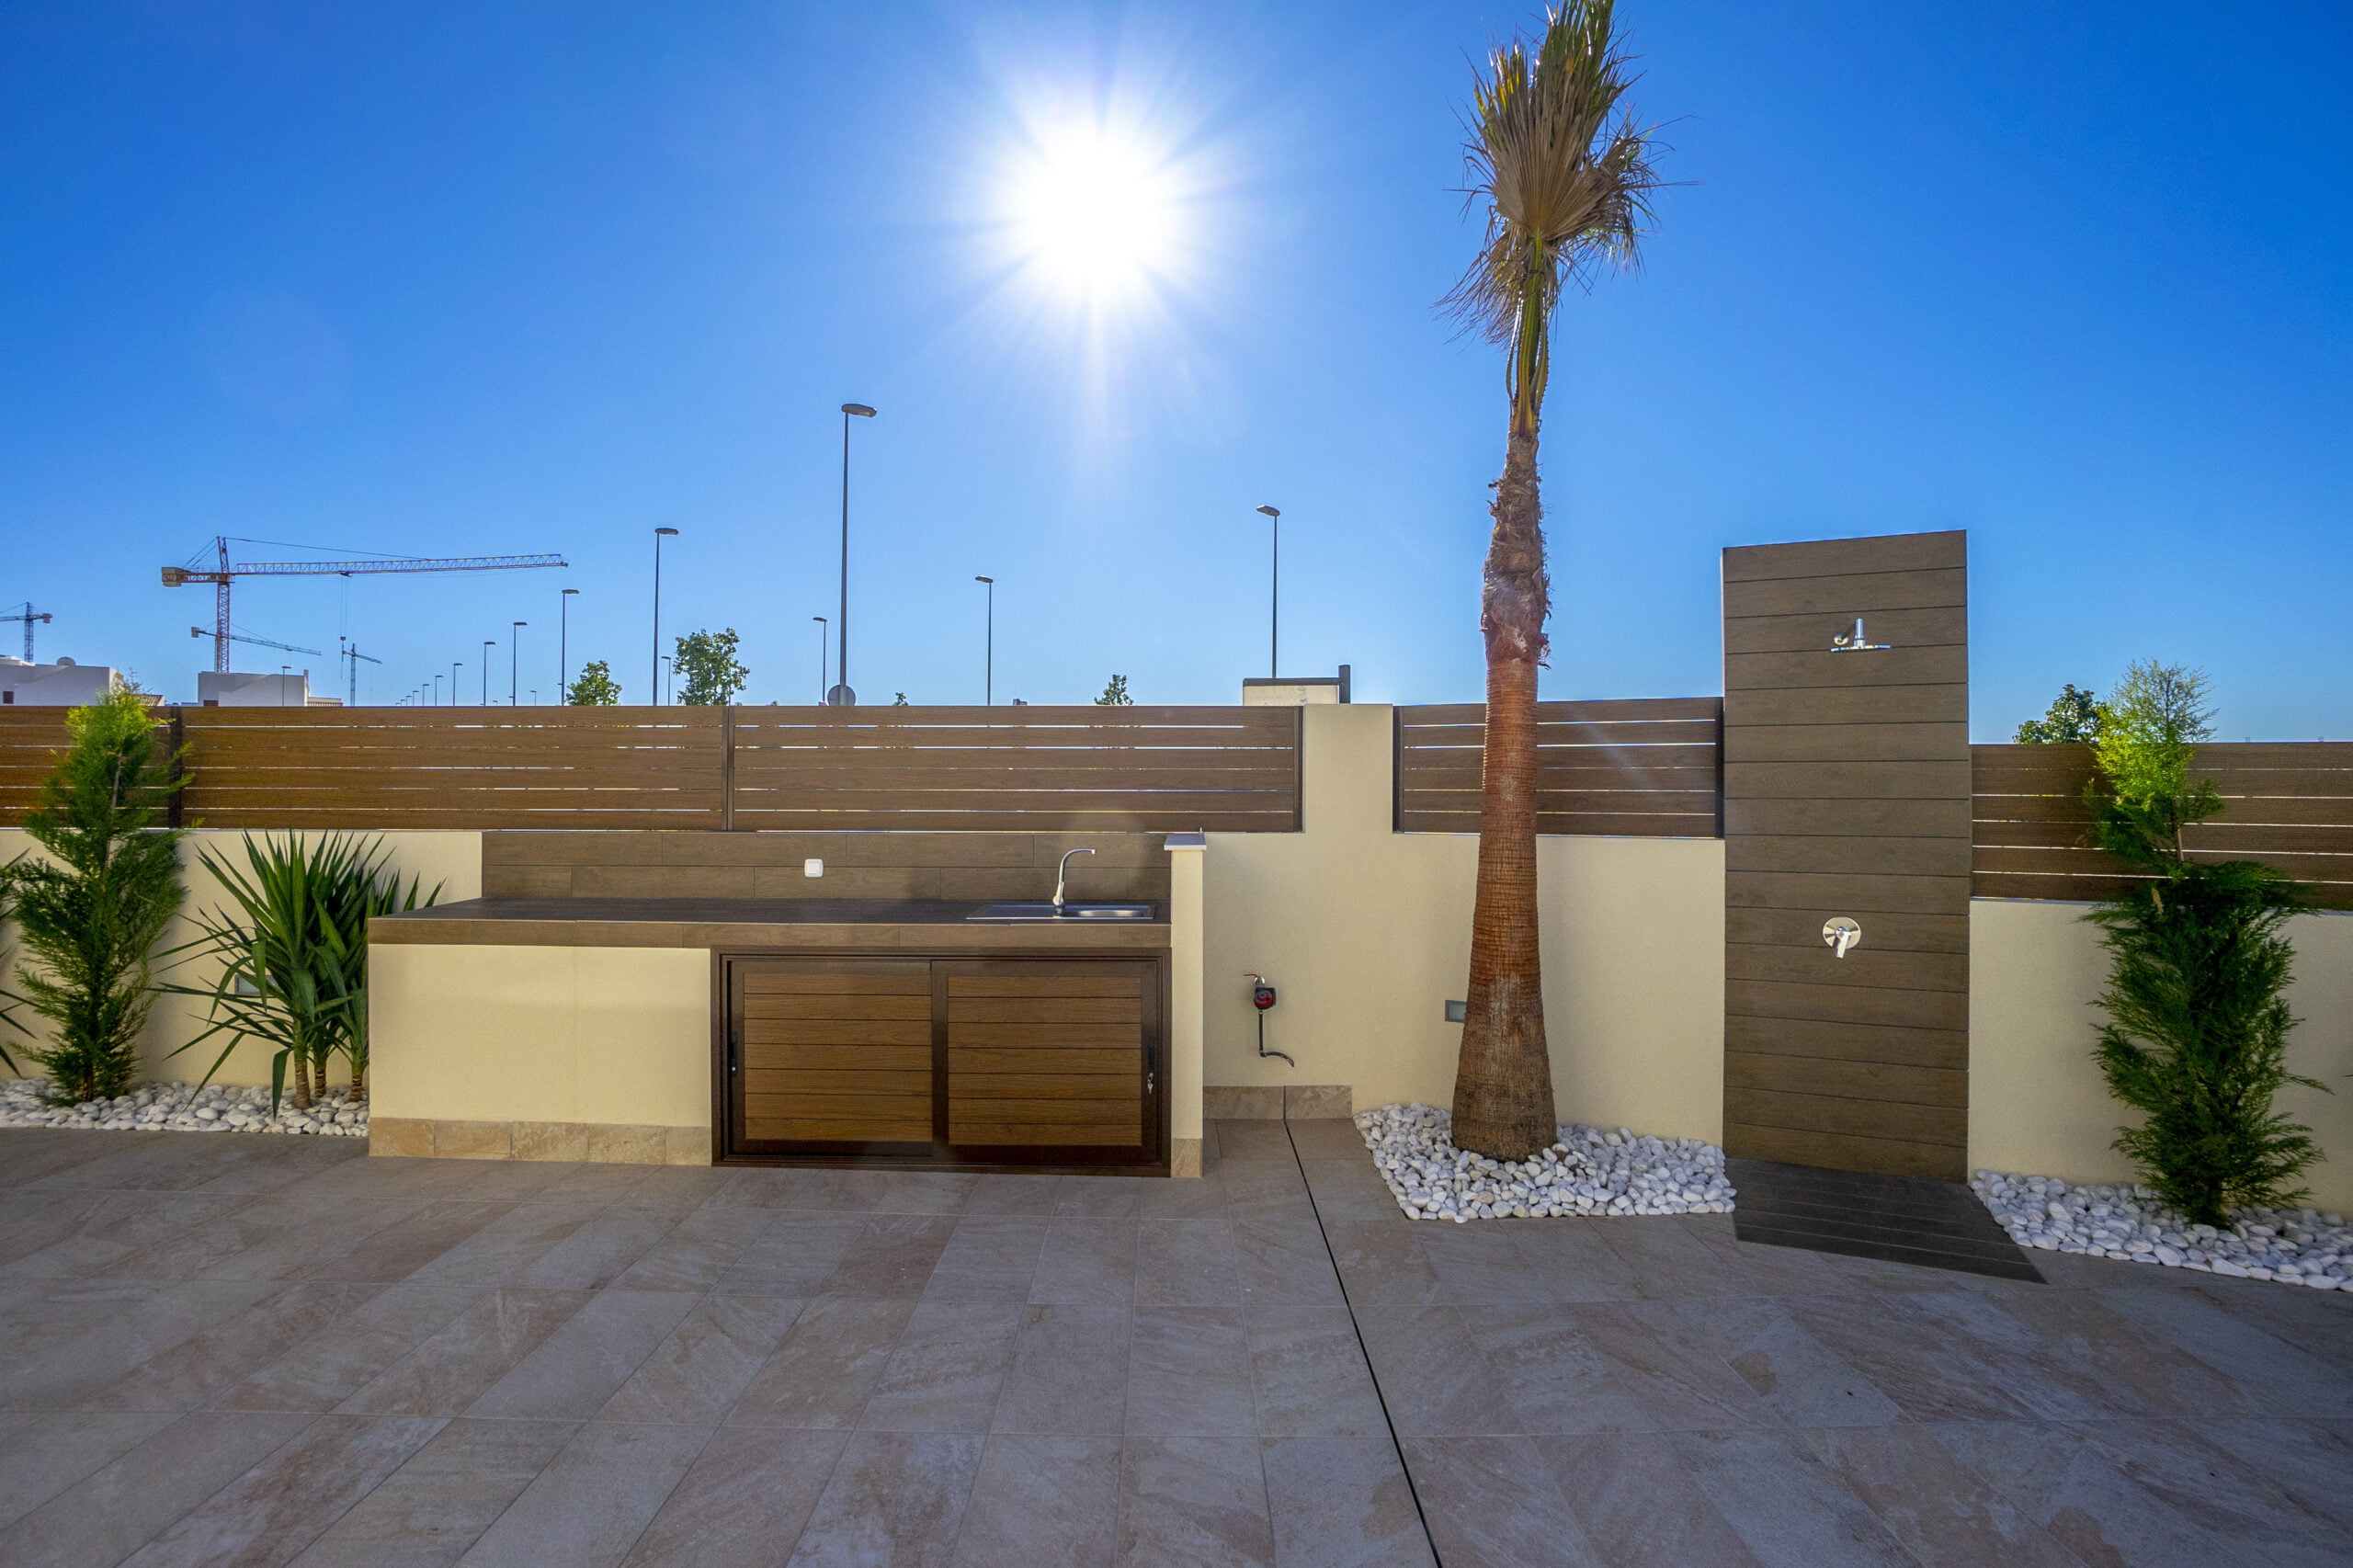 Residencial Azahar 1 - outside kitchen and pool shower